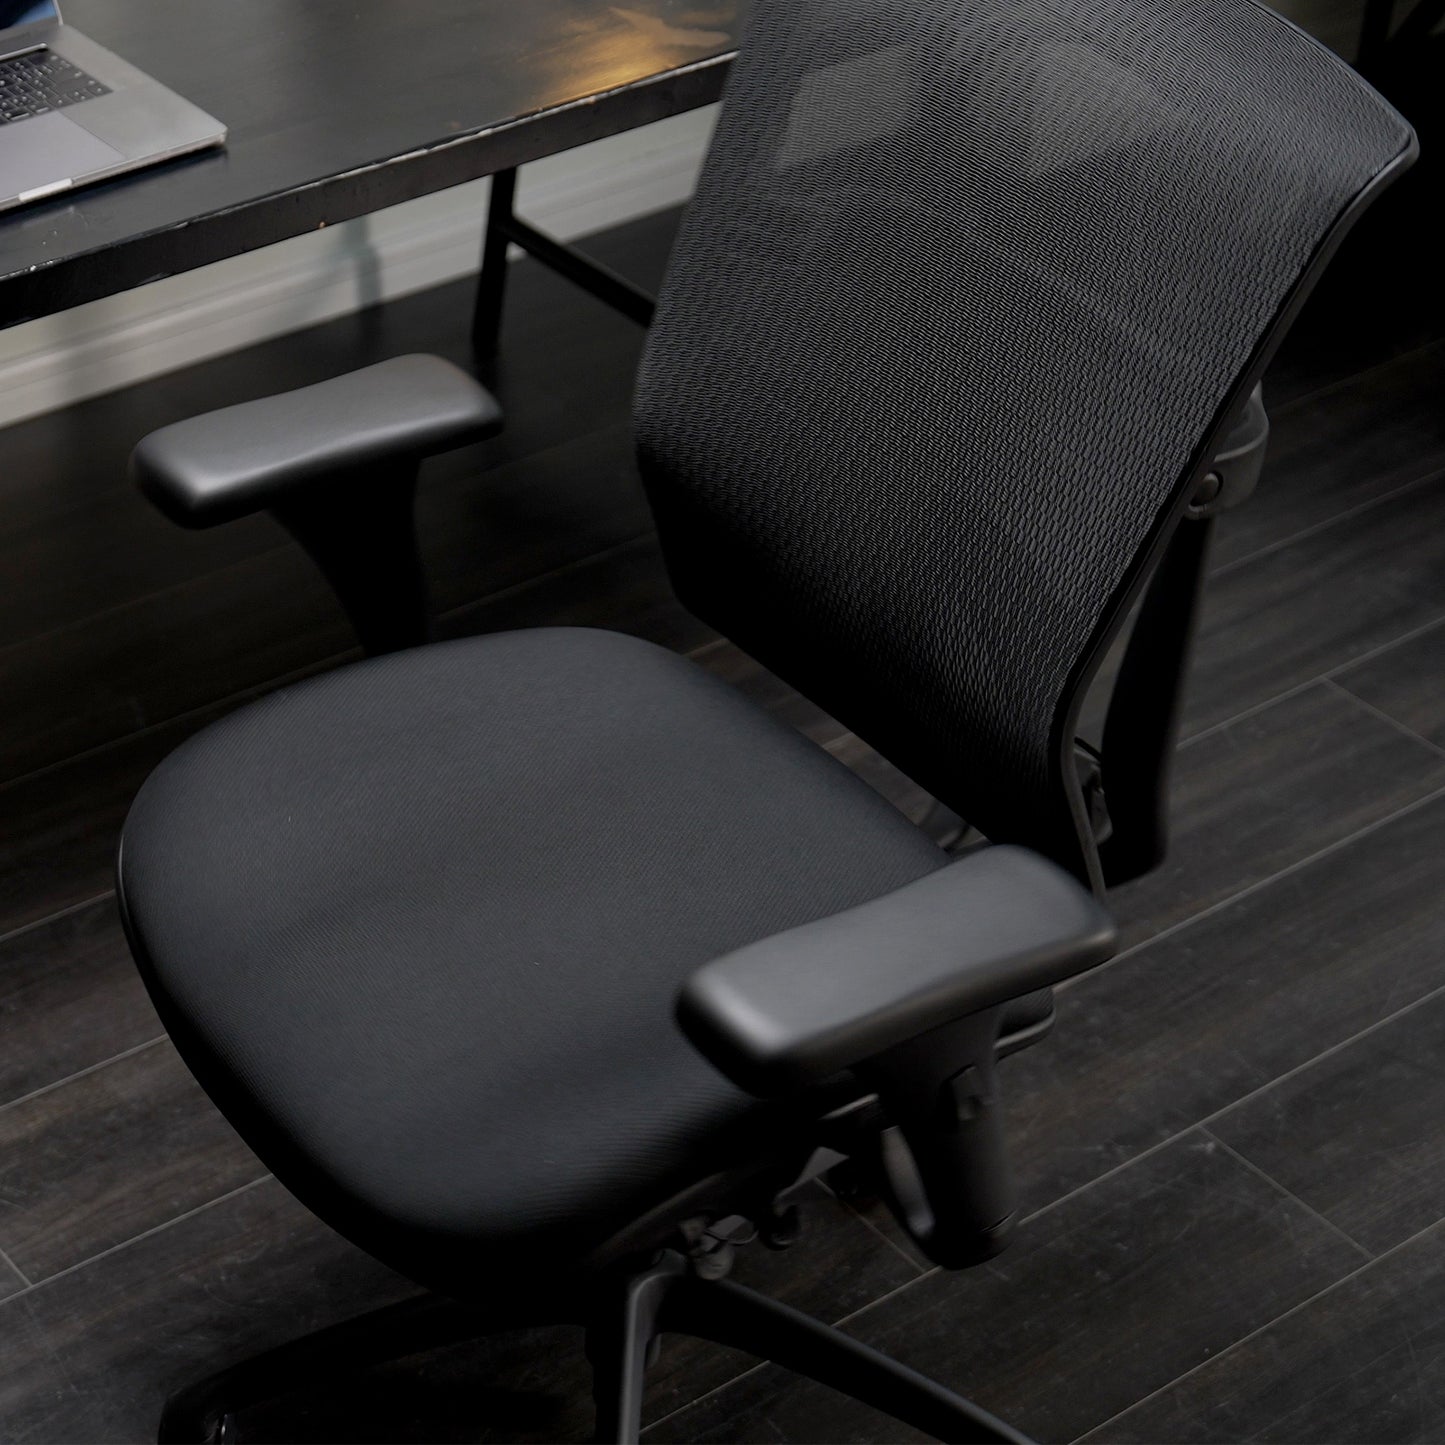 COLAMY H6 High Weight Capacity 450lbs Mesh Office Chair Big & Tall Desk Chair with Slide Seat